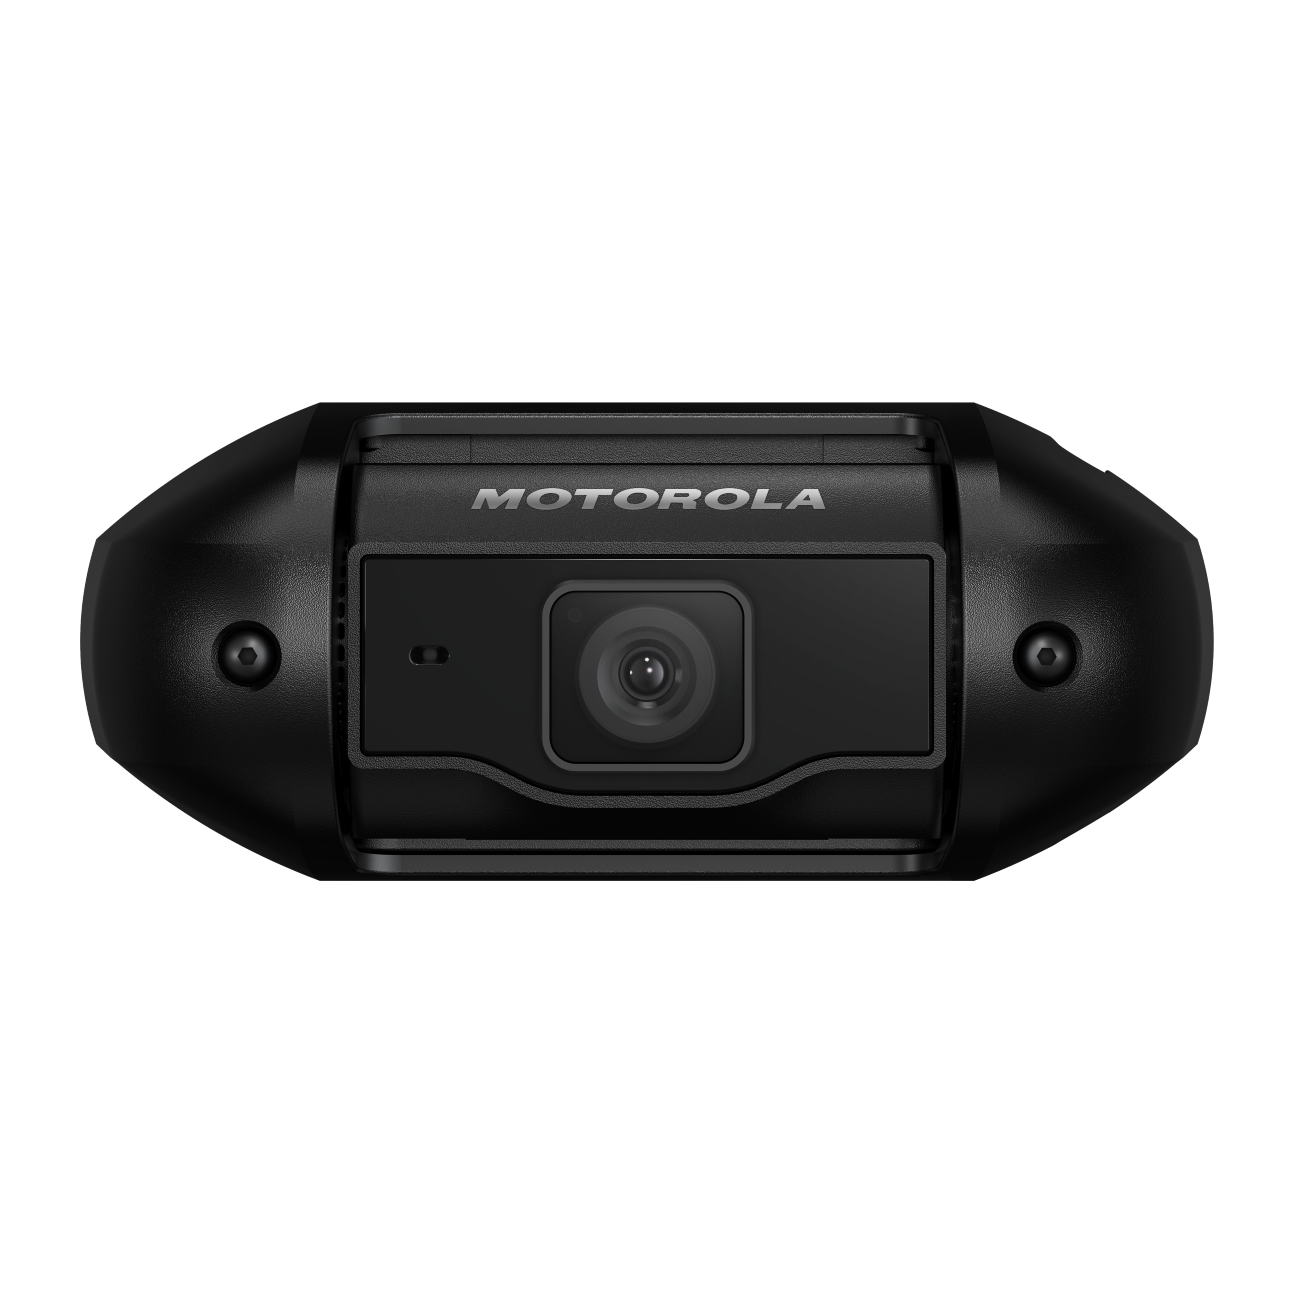 https://www.motorolasolutions.com/content/dam/msi/images/in-car-video-systems/m500/m5p-front.png